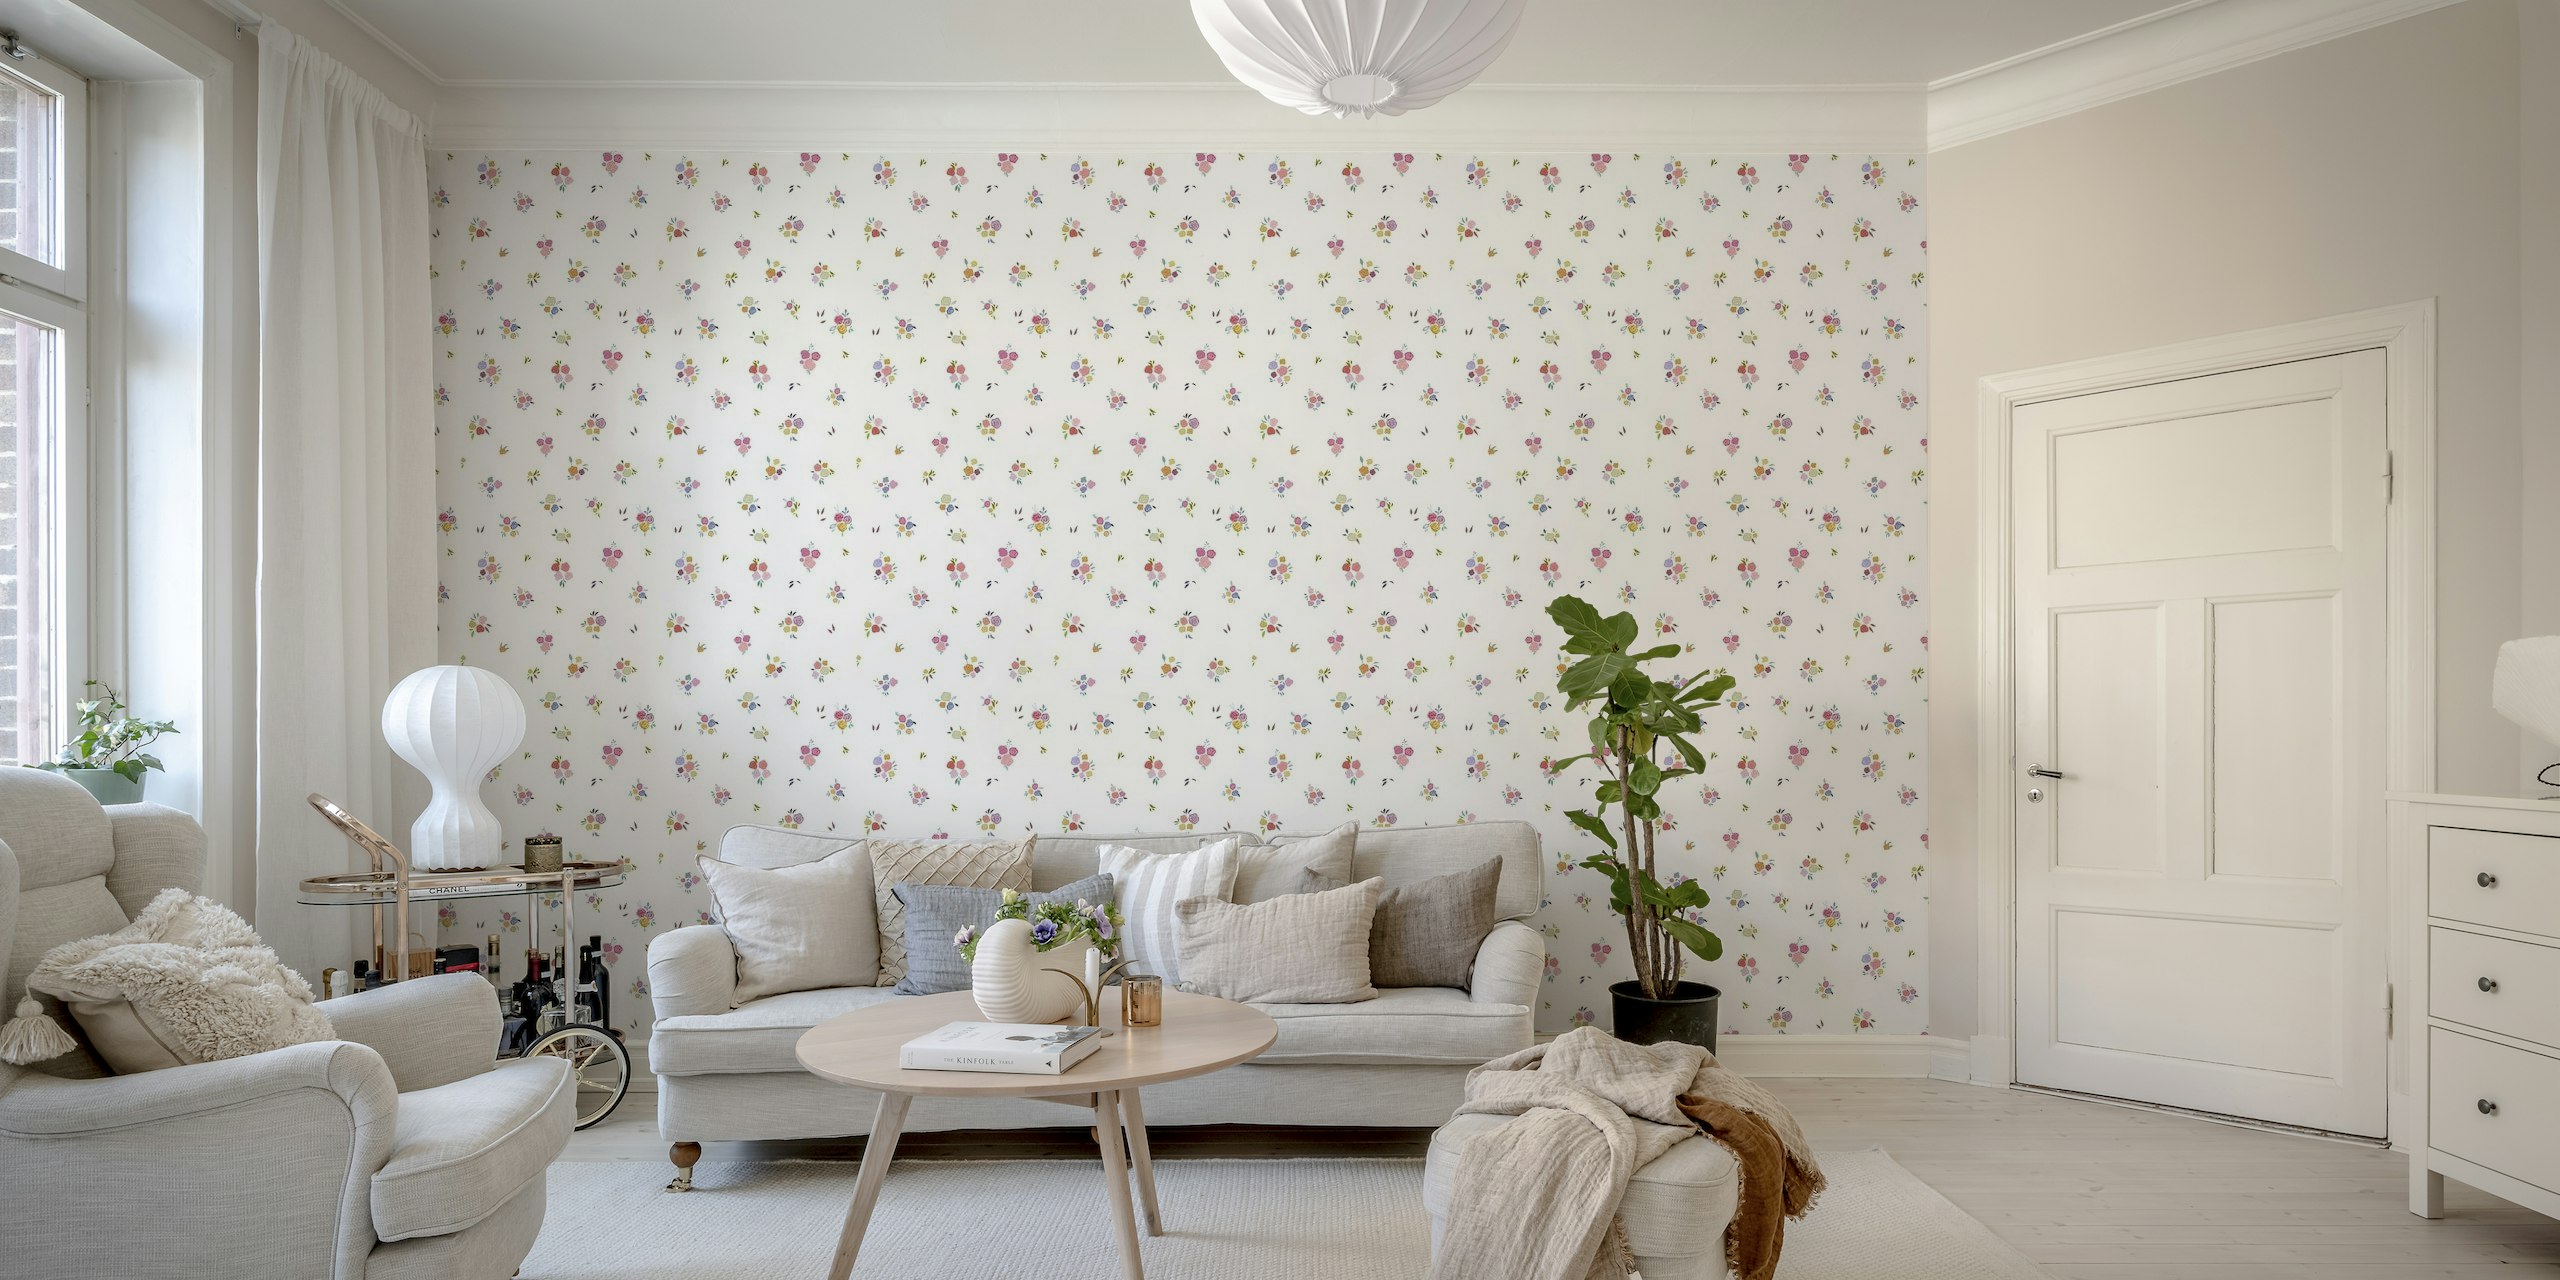 Ditsy floral pattern wall mural with colorful small flowers on a white background